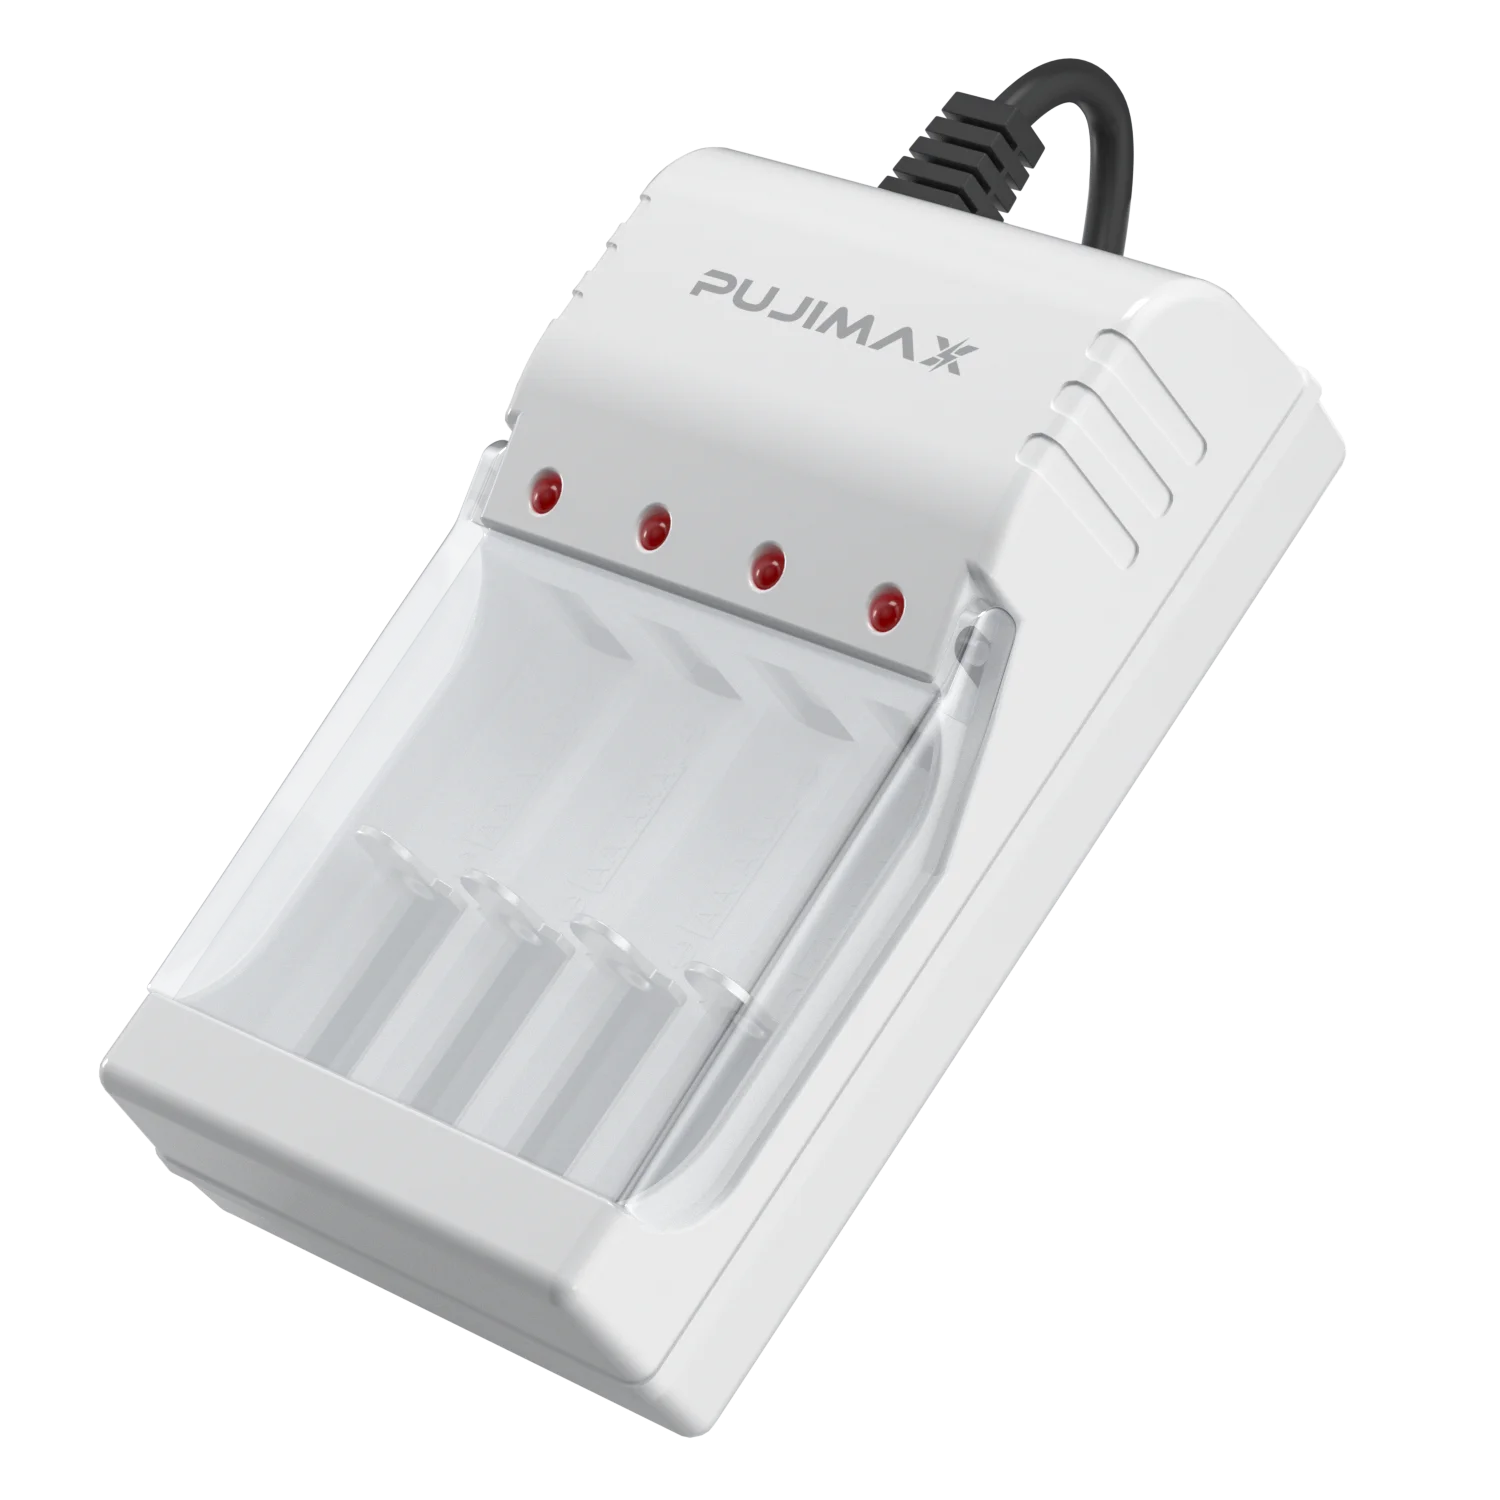 

PUJIMAX universal 4 slots LED battery charger for 1.2V AA AAA Ni-Mh Ni-Cd rechargeable battery, White